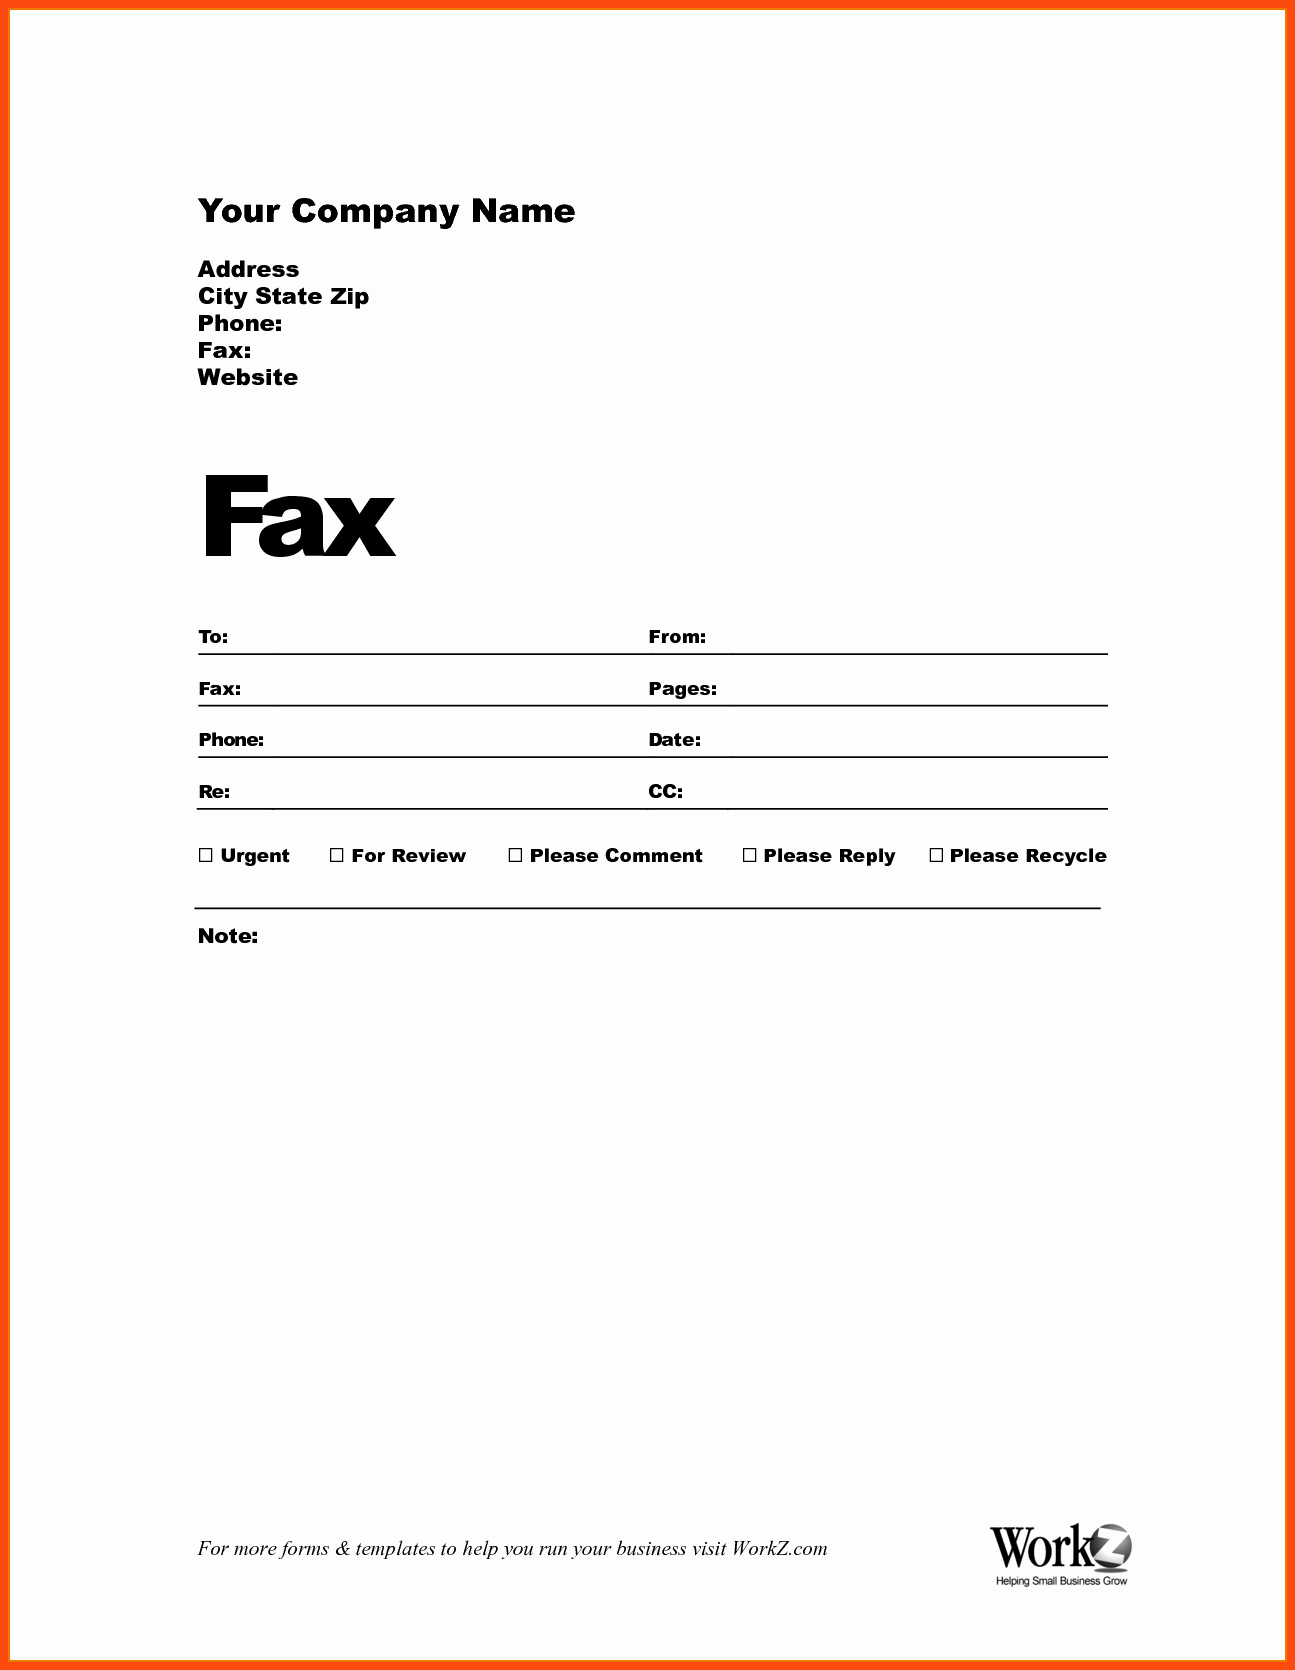 Fax Cover Letter Sample Unique How to Fill Out A Fax Cover Sheet